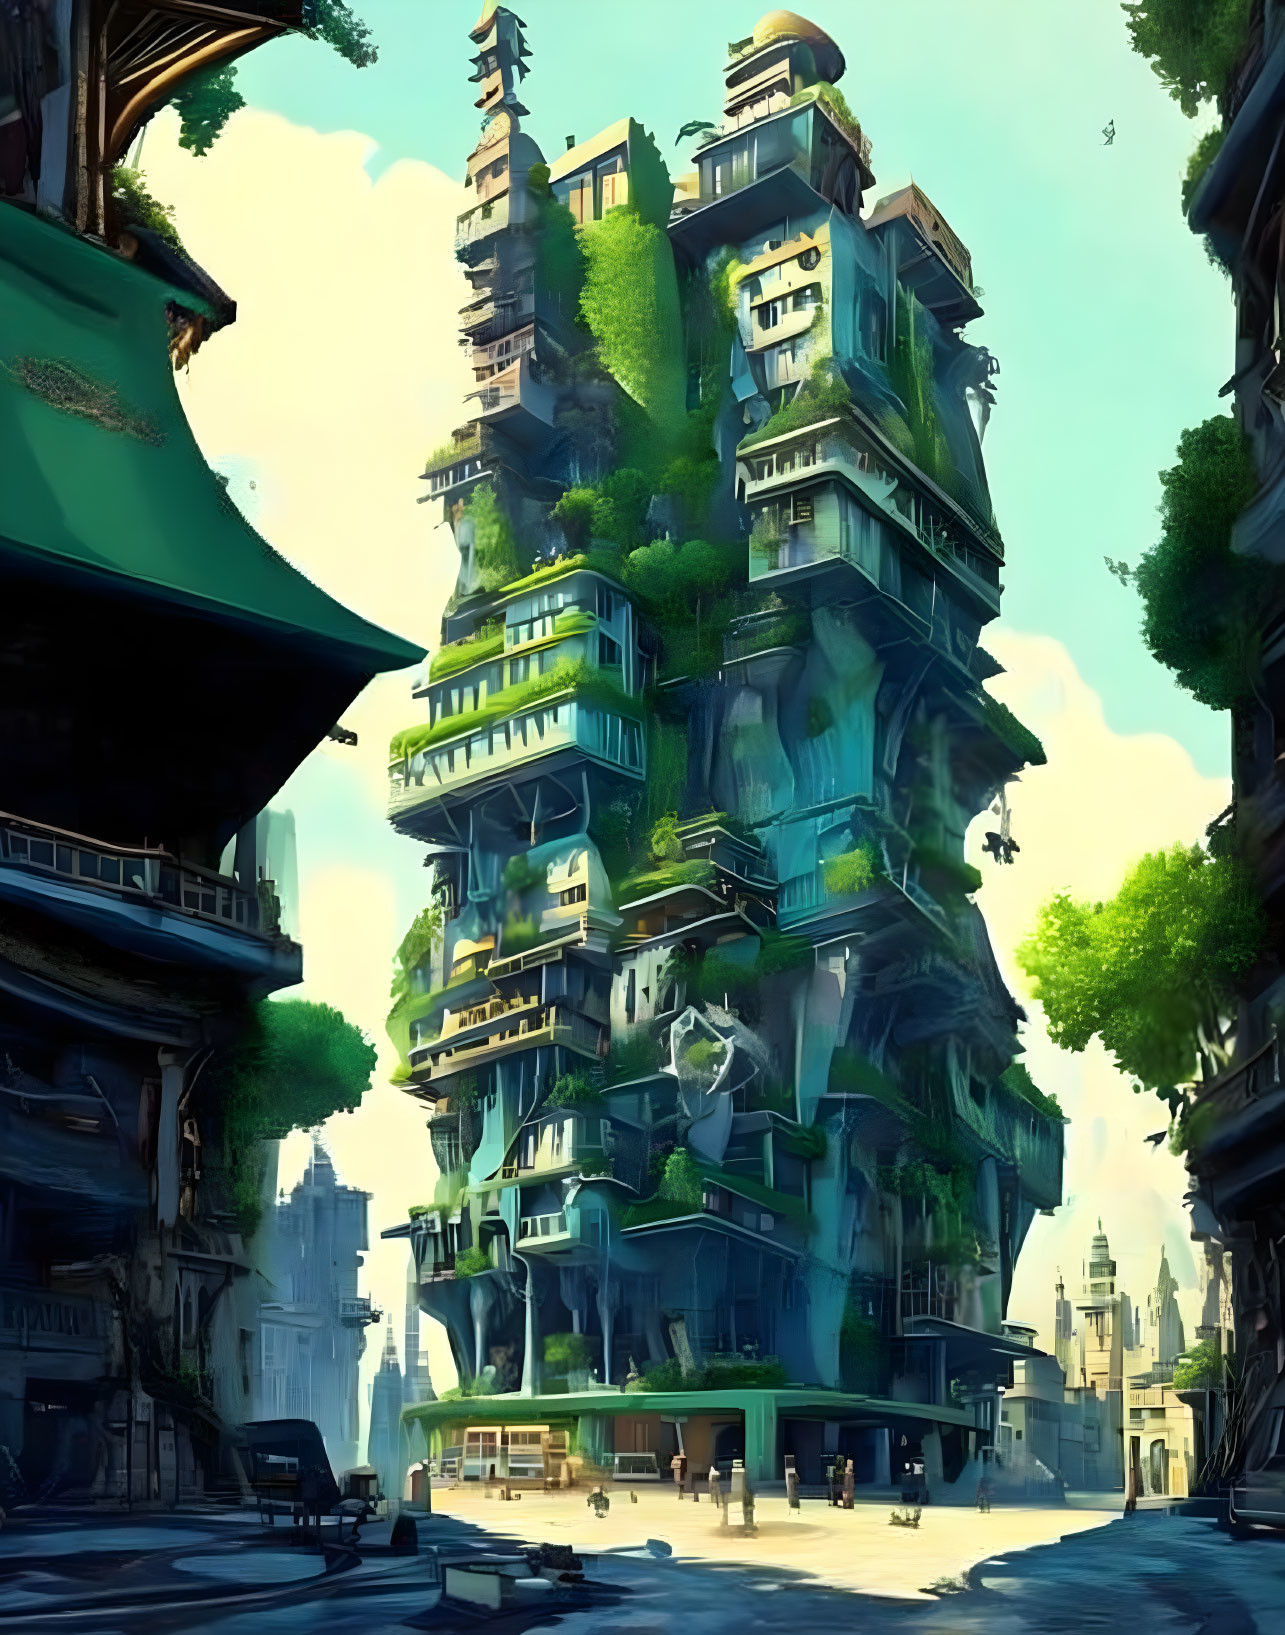 The green tower